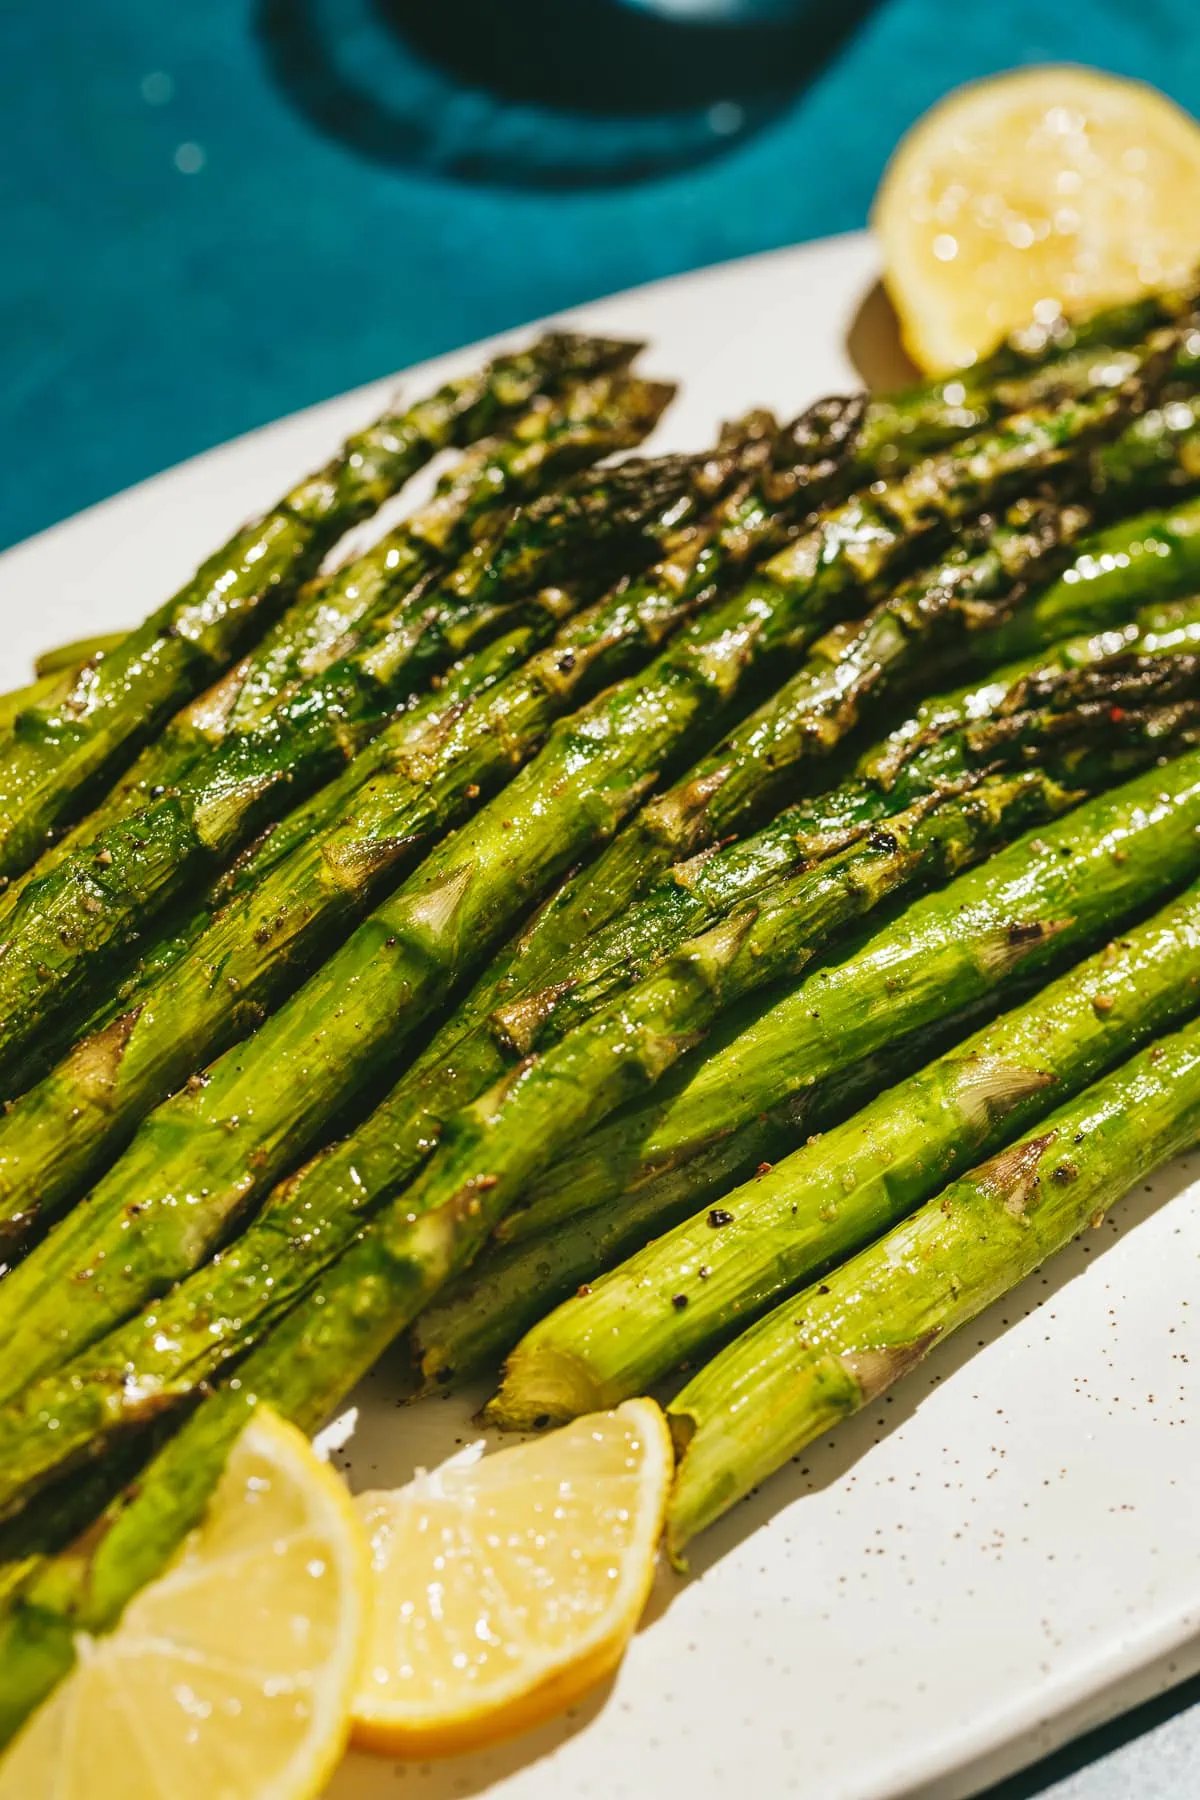 Traeger smoked asparagus on a white plate with lemon slices.